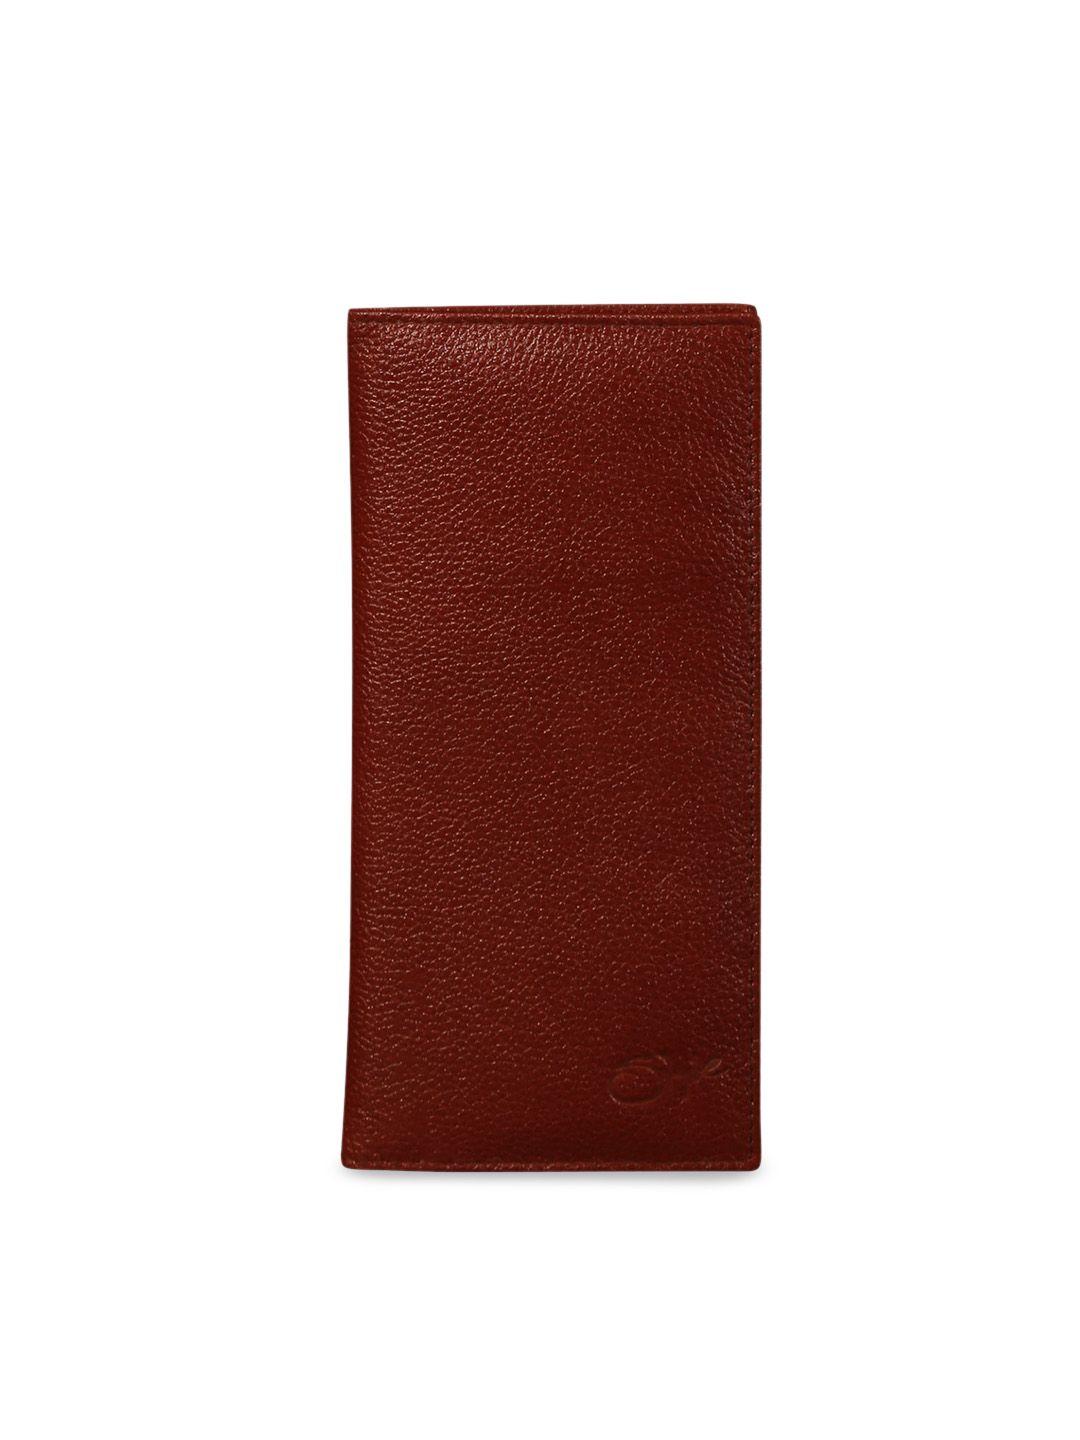 style shoes unisex maroon solid leather card holder